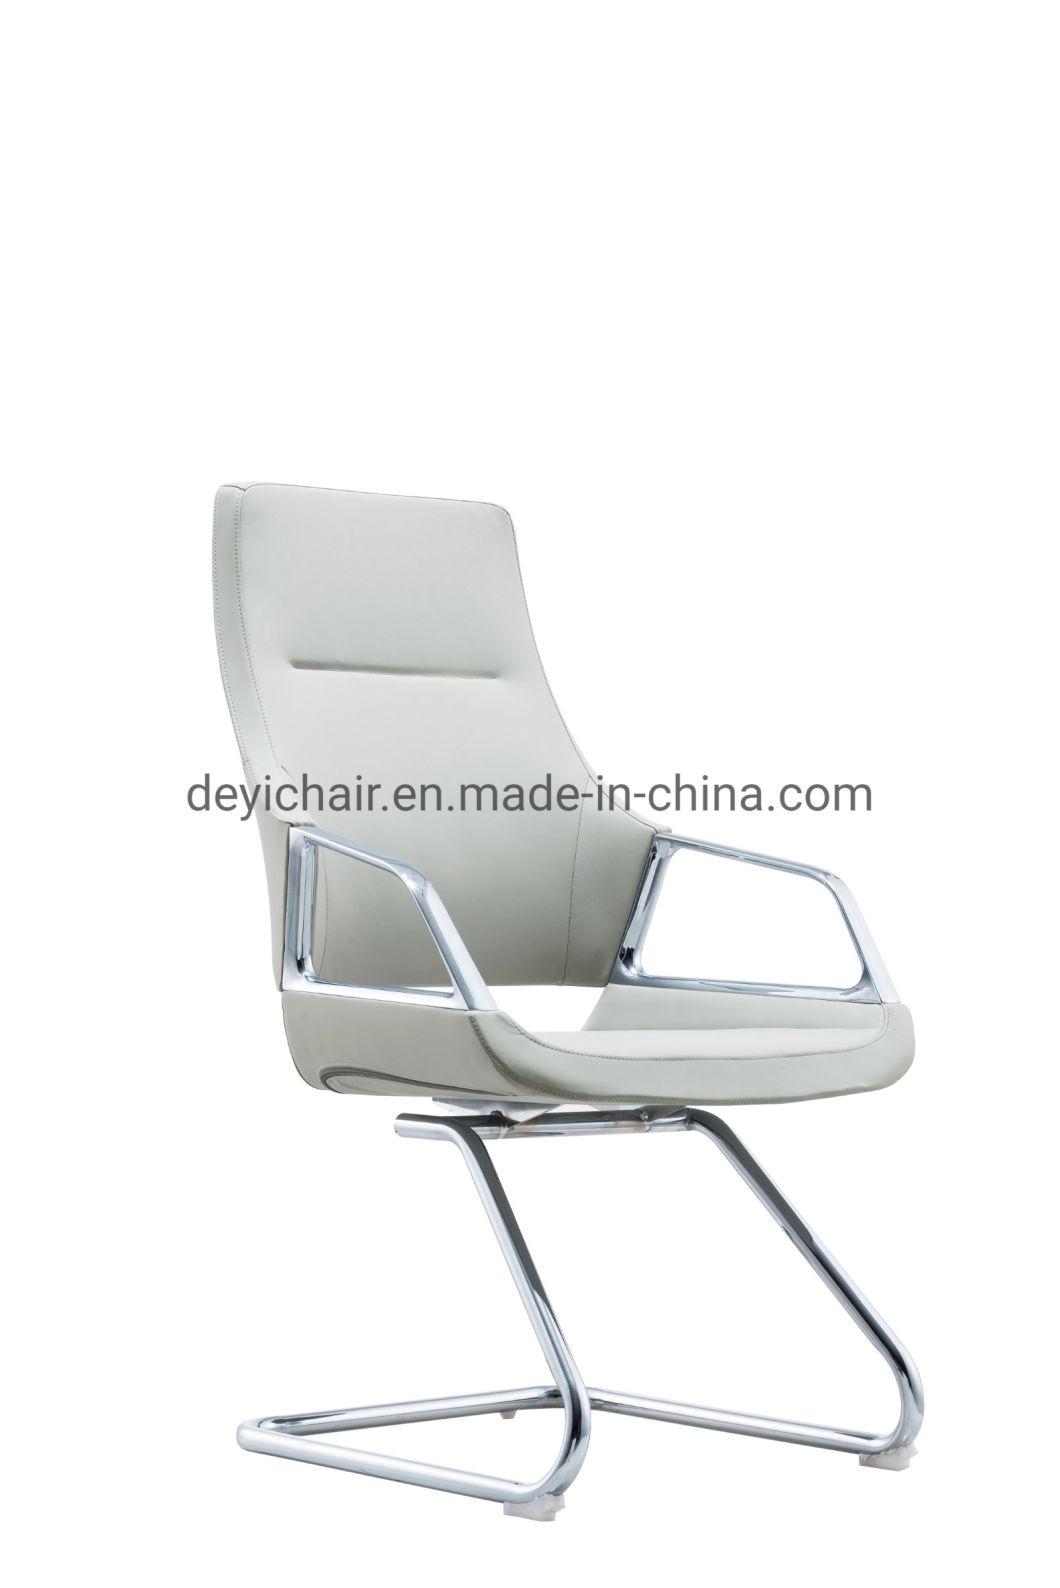 Steel Frame Chromed Finished Base PU / Leather Upholstery with Padding Arm for Seat and Back Conference Chair